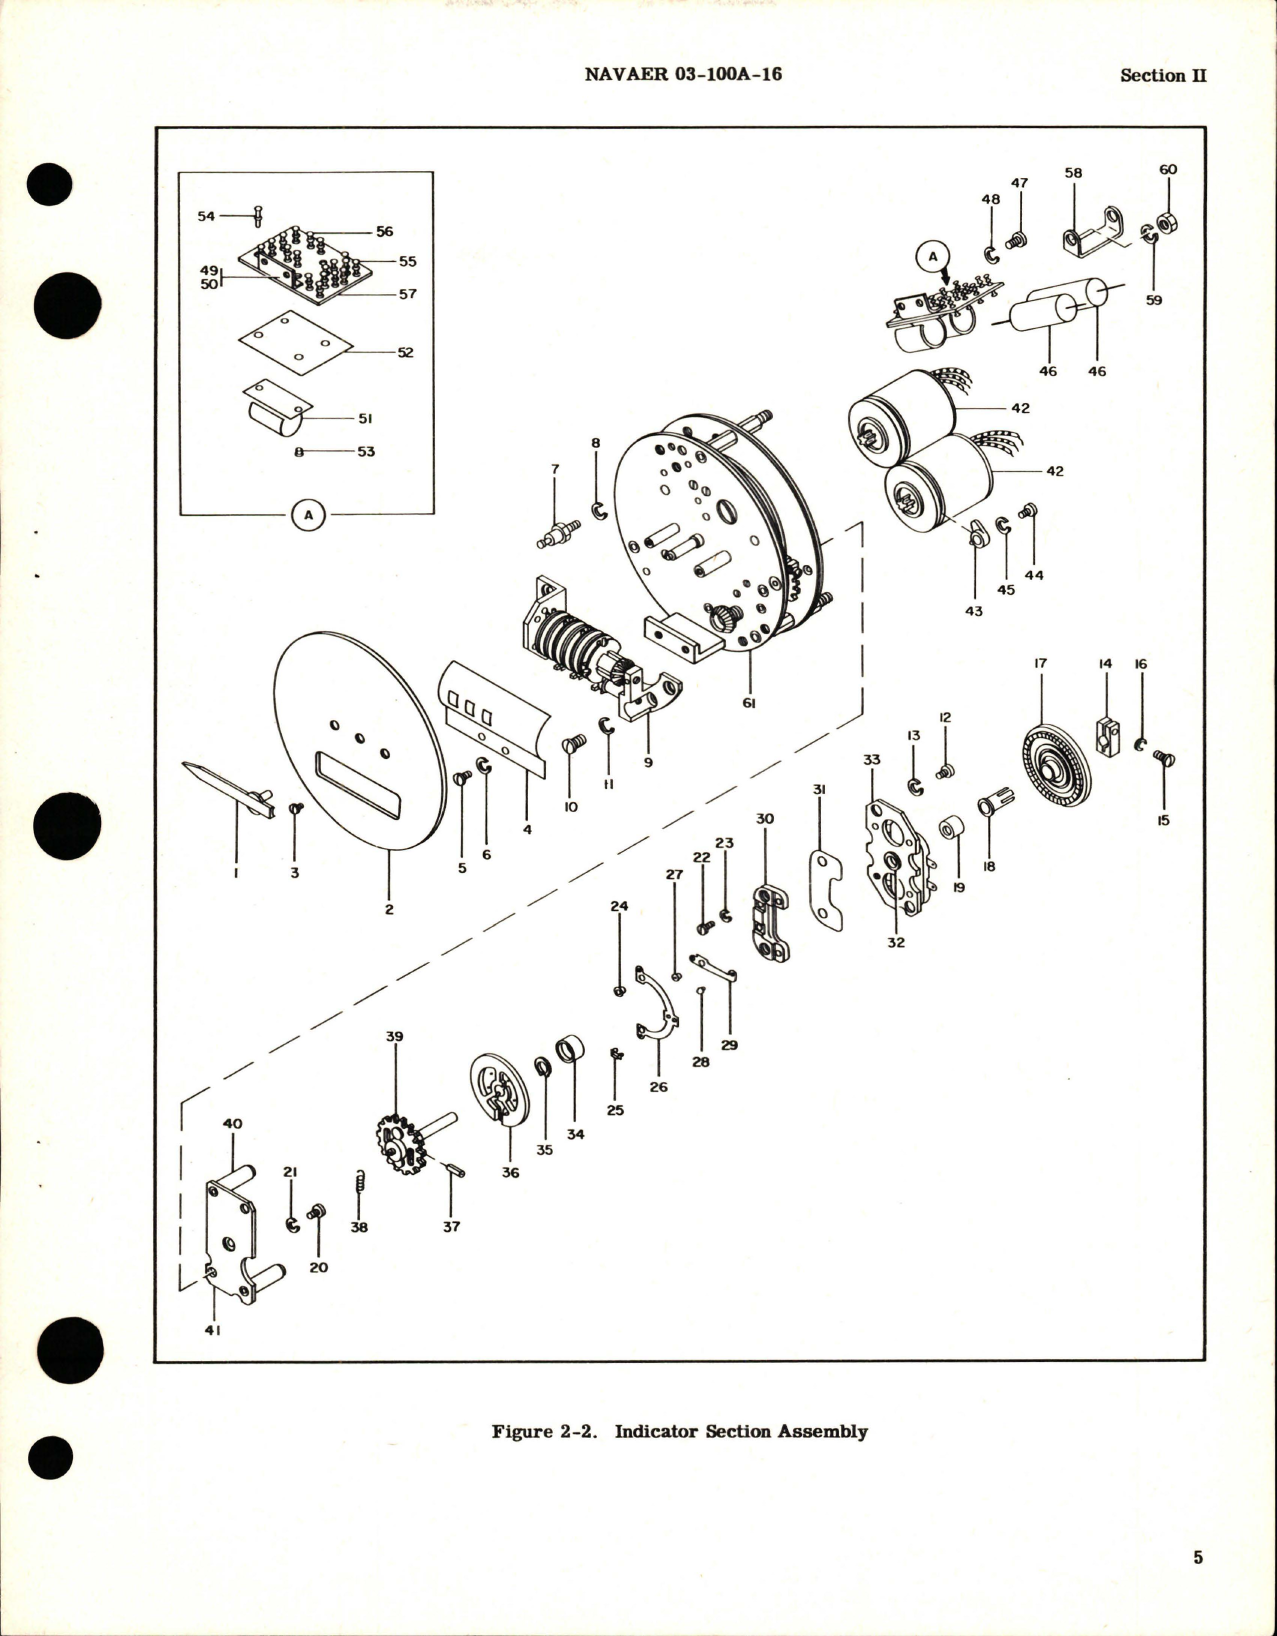 Sample page 7 from AirCorps Library document: Overhaul Instructions for Indicator Power Unit - Part EA932C-3 